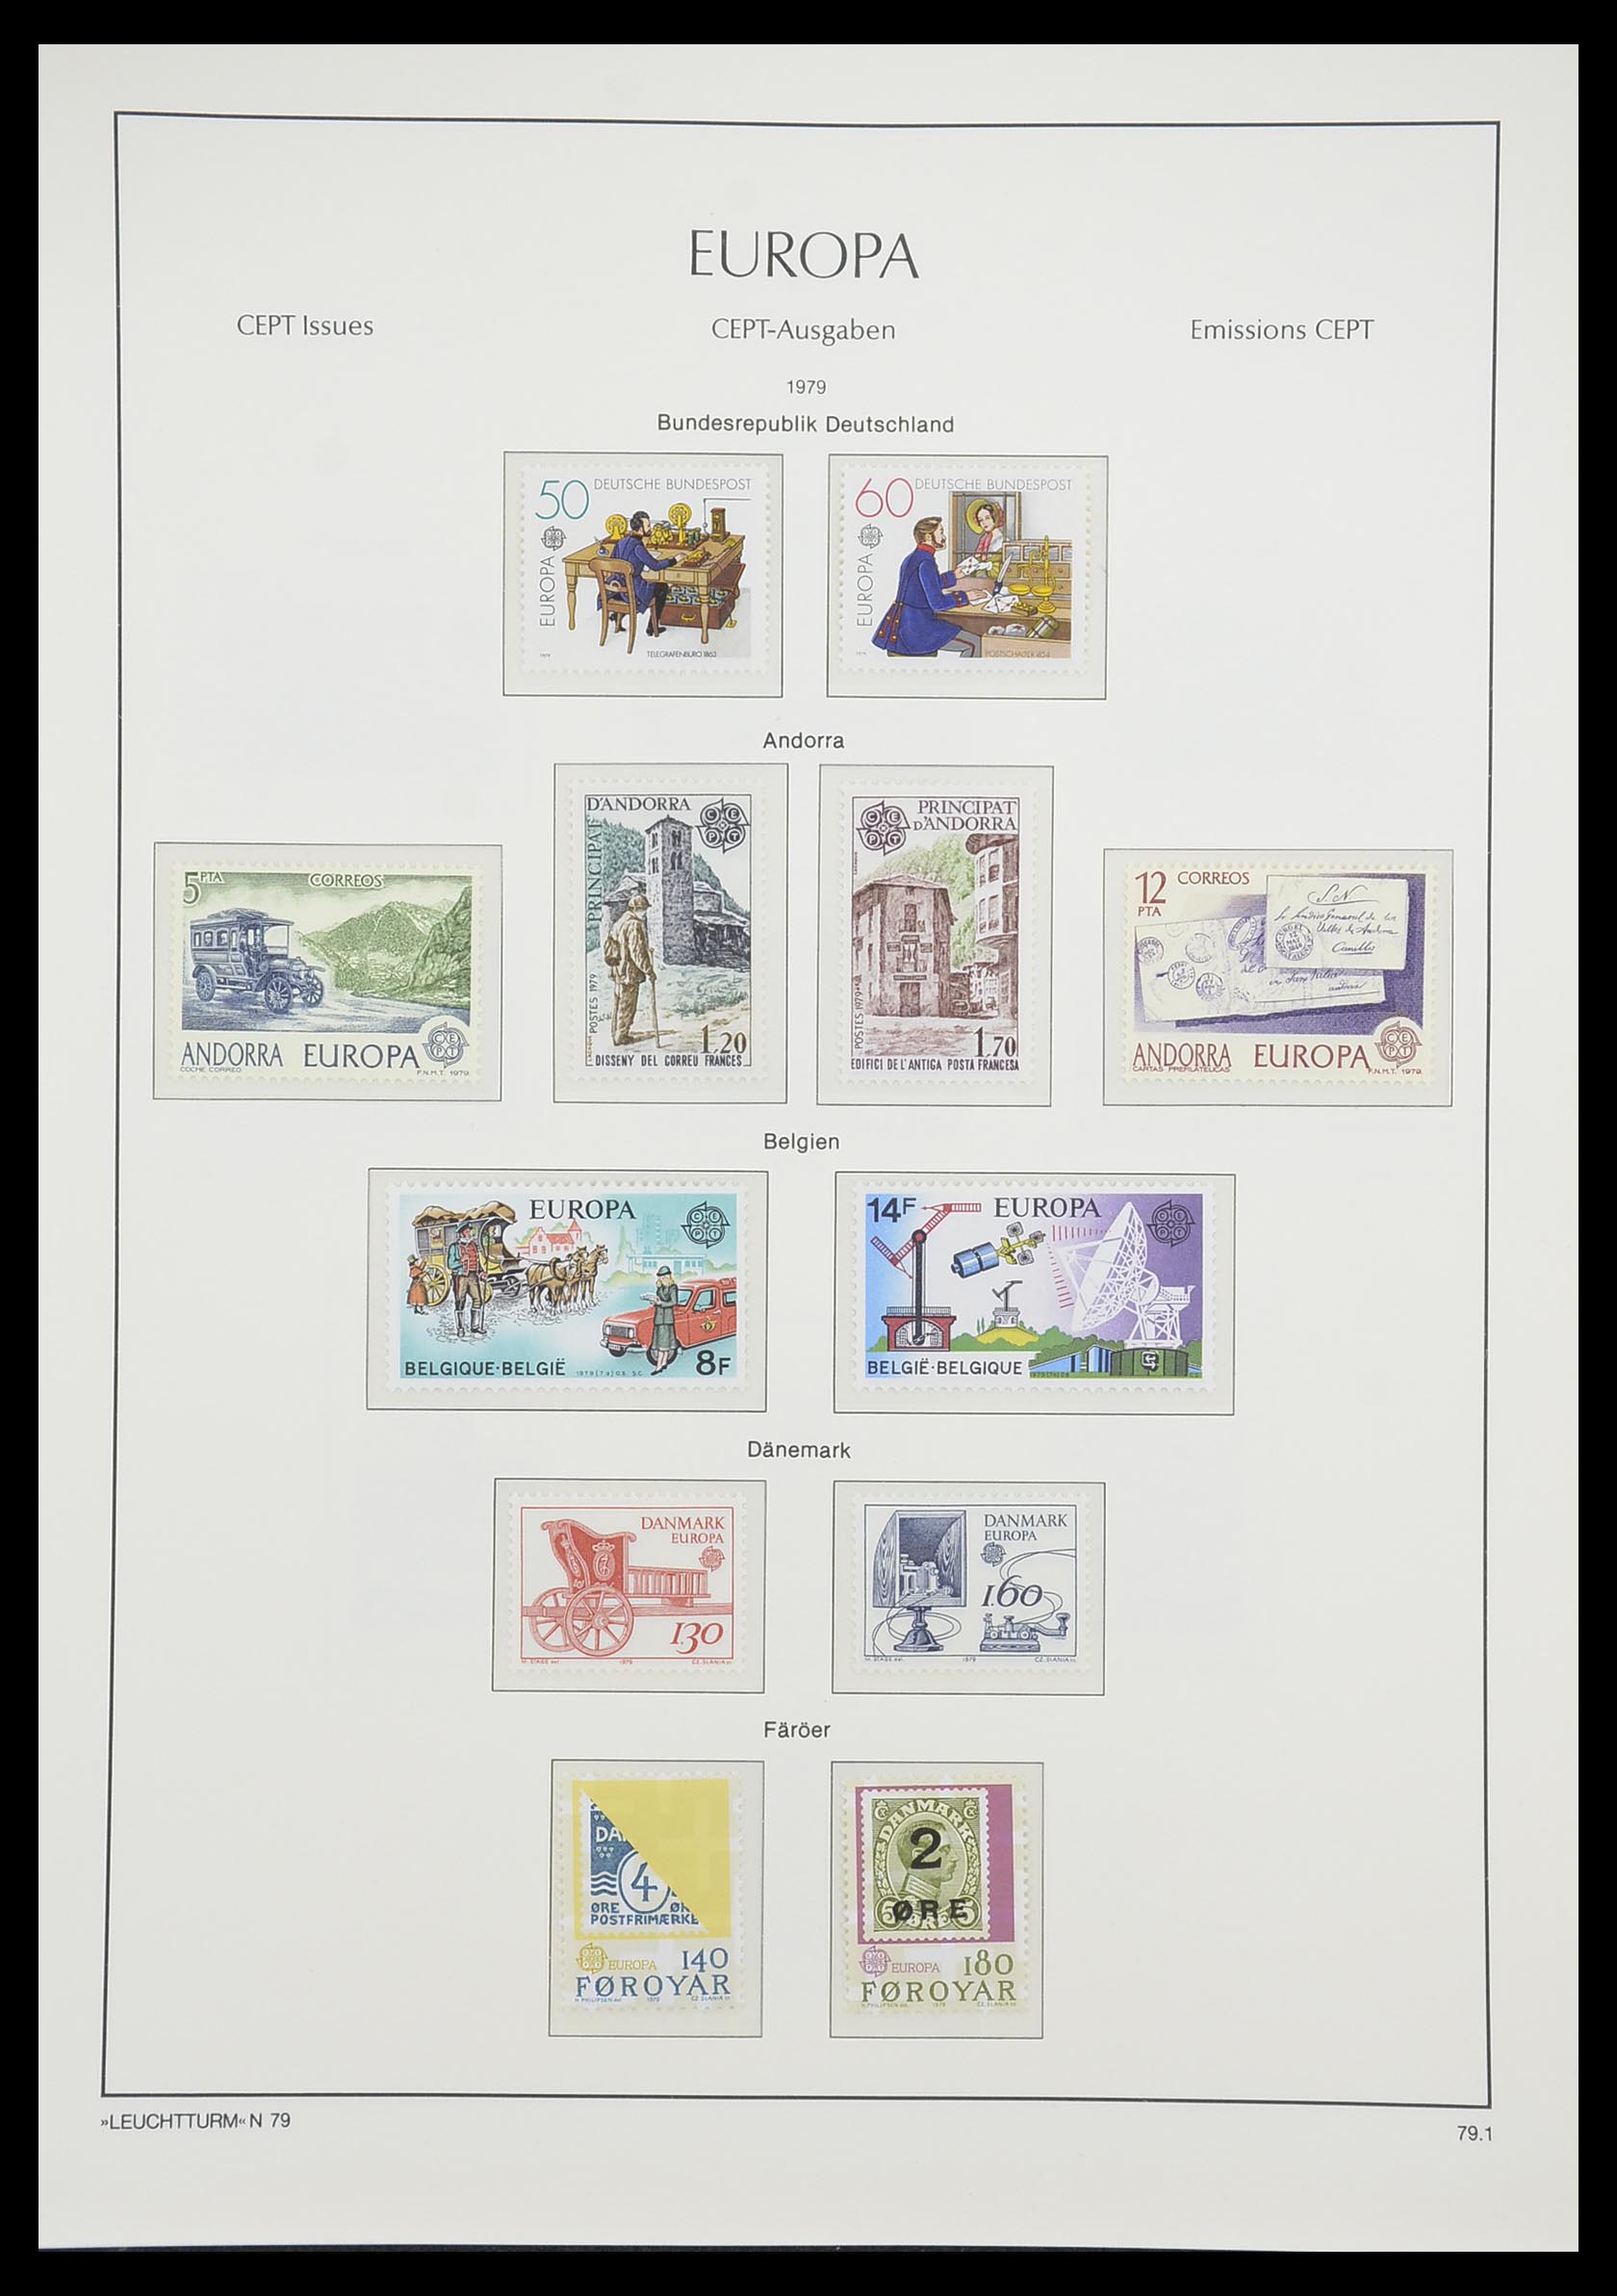 33339 096 - Stamp collection 33339 Europa CEPT 1956-1990.